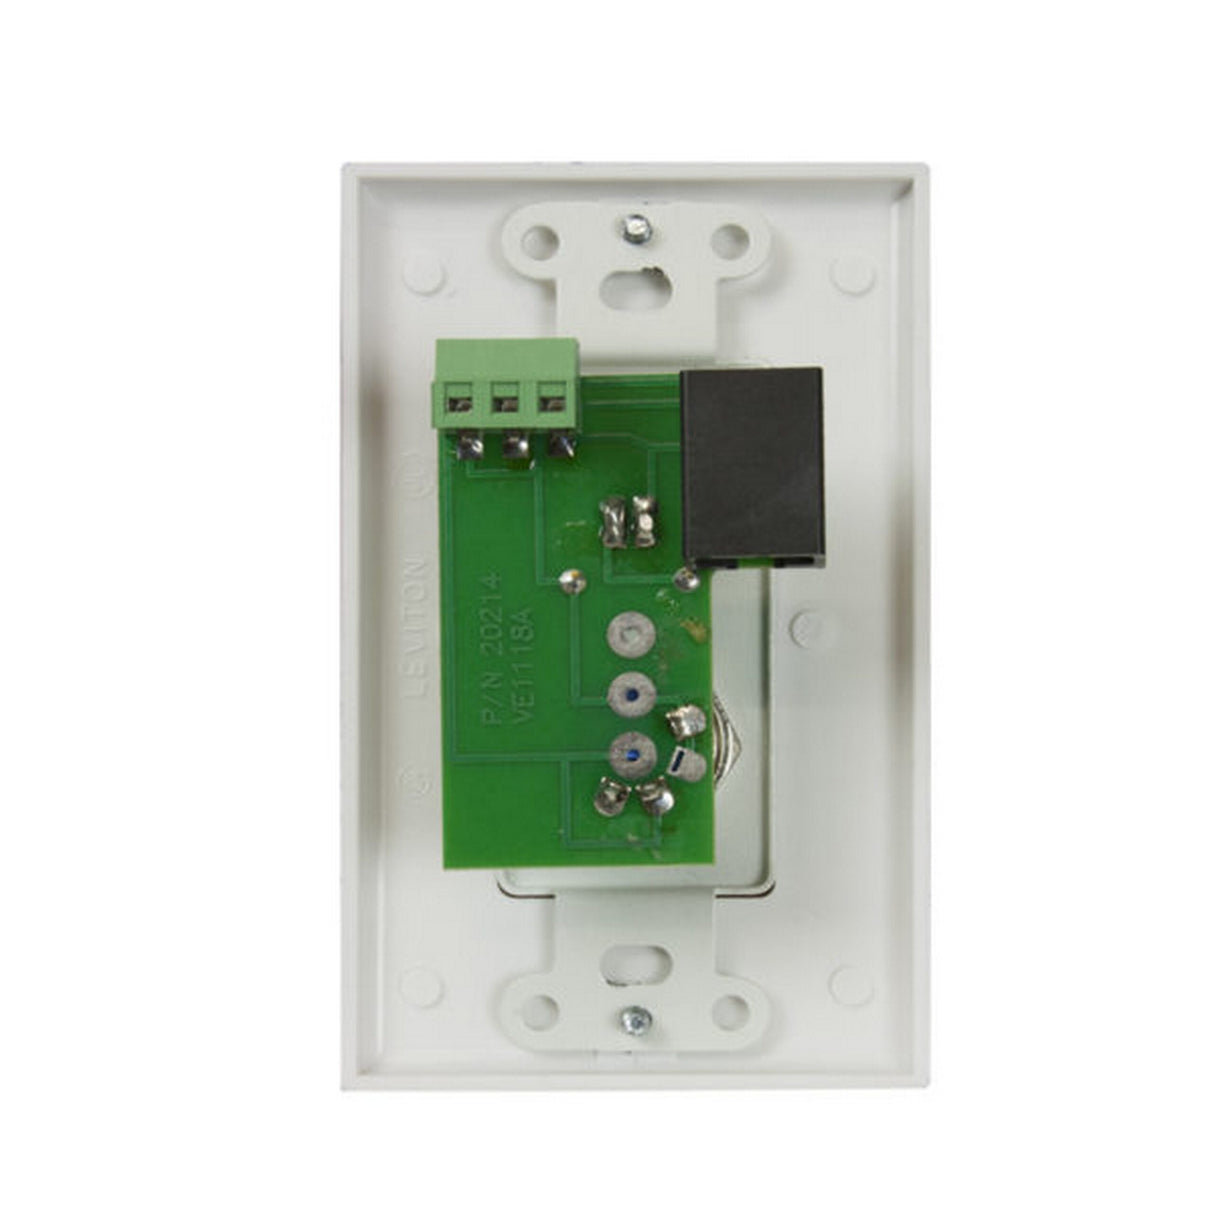 Lowell RPSW-KP-RJ Maintained SPST Low-Voltage Key Switch with RJ45 Connector